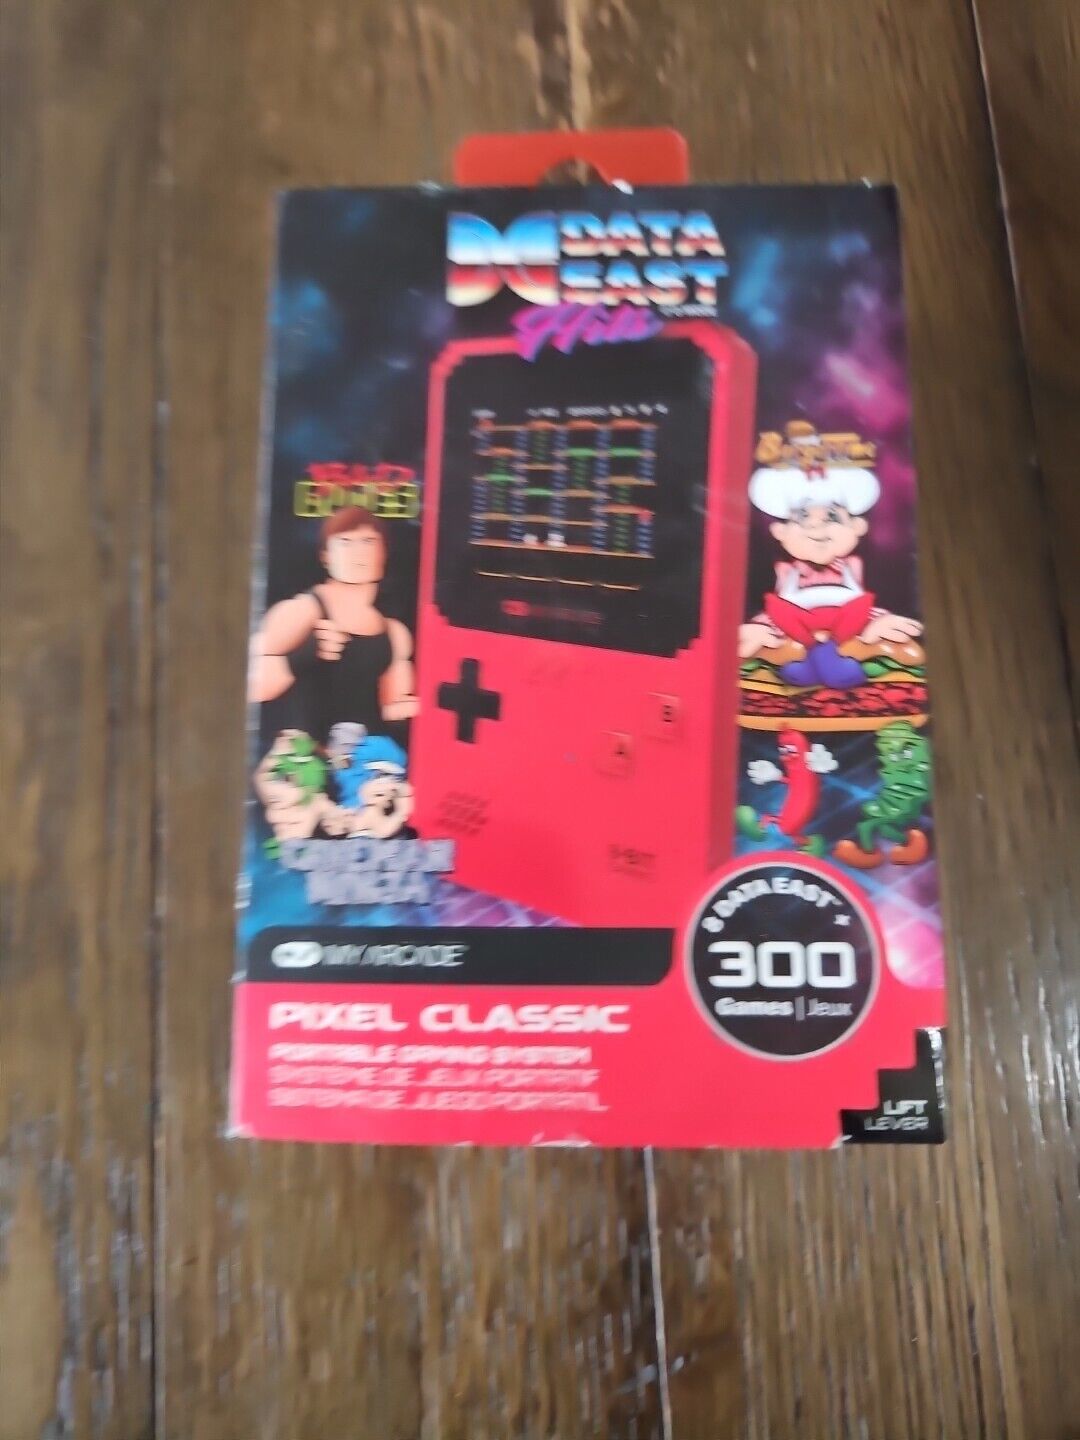 DATA EAST HITS MY ARCADE Portable Gaming System 300 Games New Classic Bad Dudes